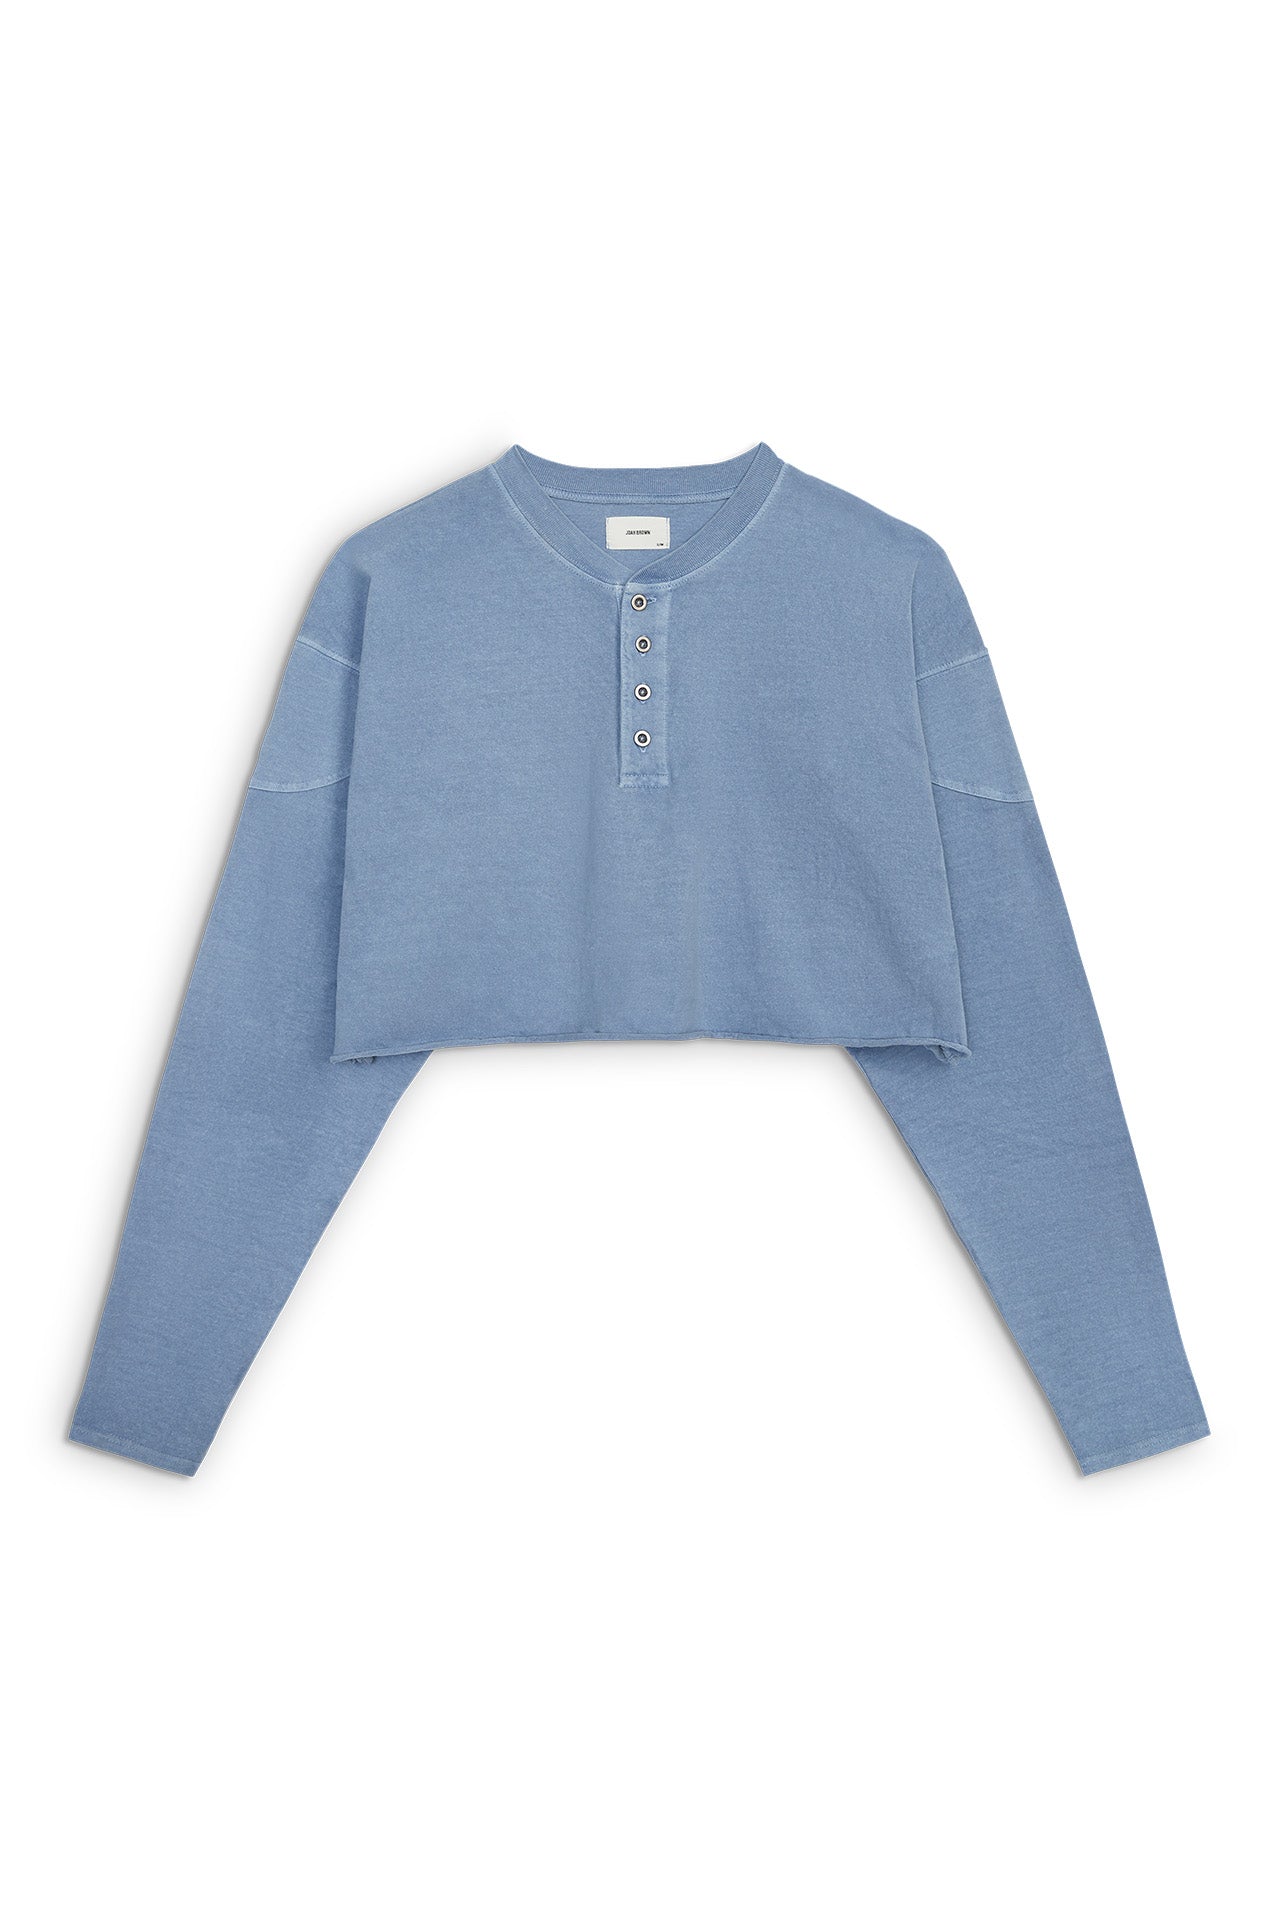 Front flat lay view of the cropped, loose-fitting denim cotton Vintage Henley Long Sleeve top with dropped shoulders and custom JOAH BROWN buttons